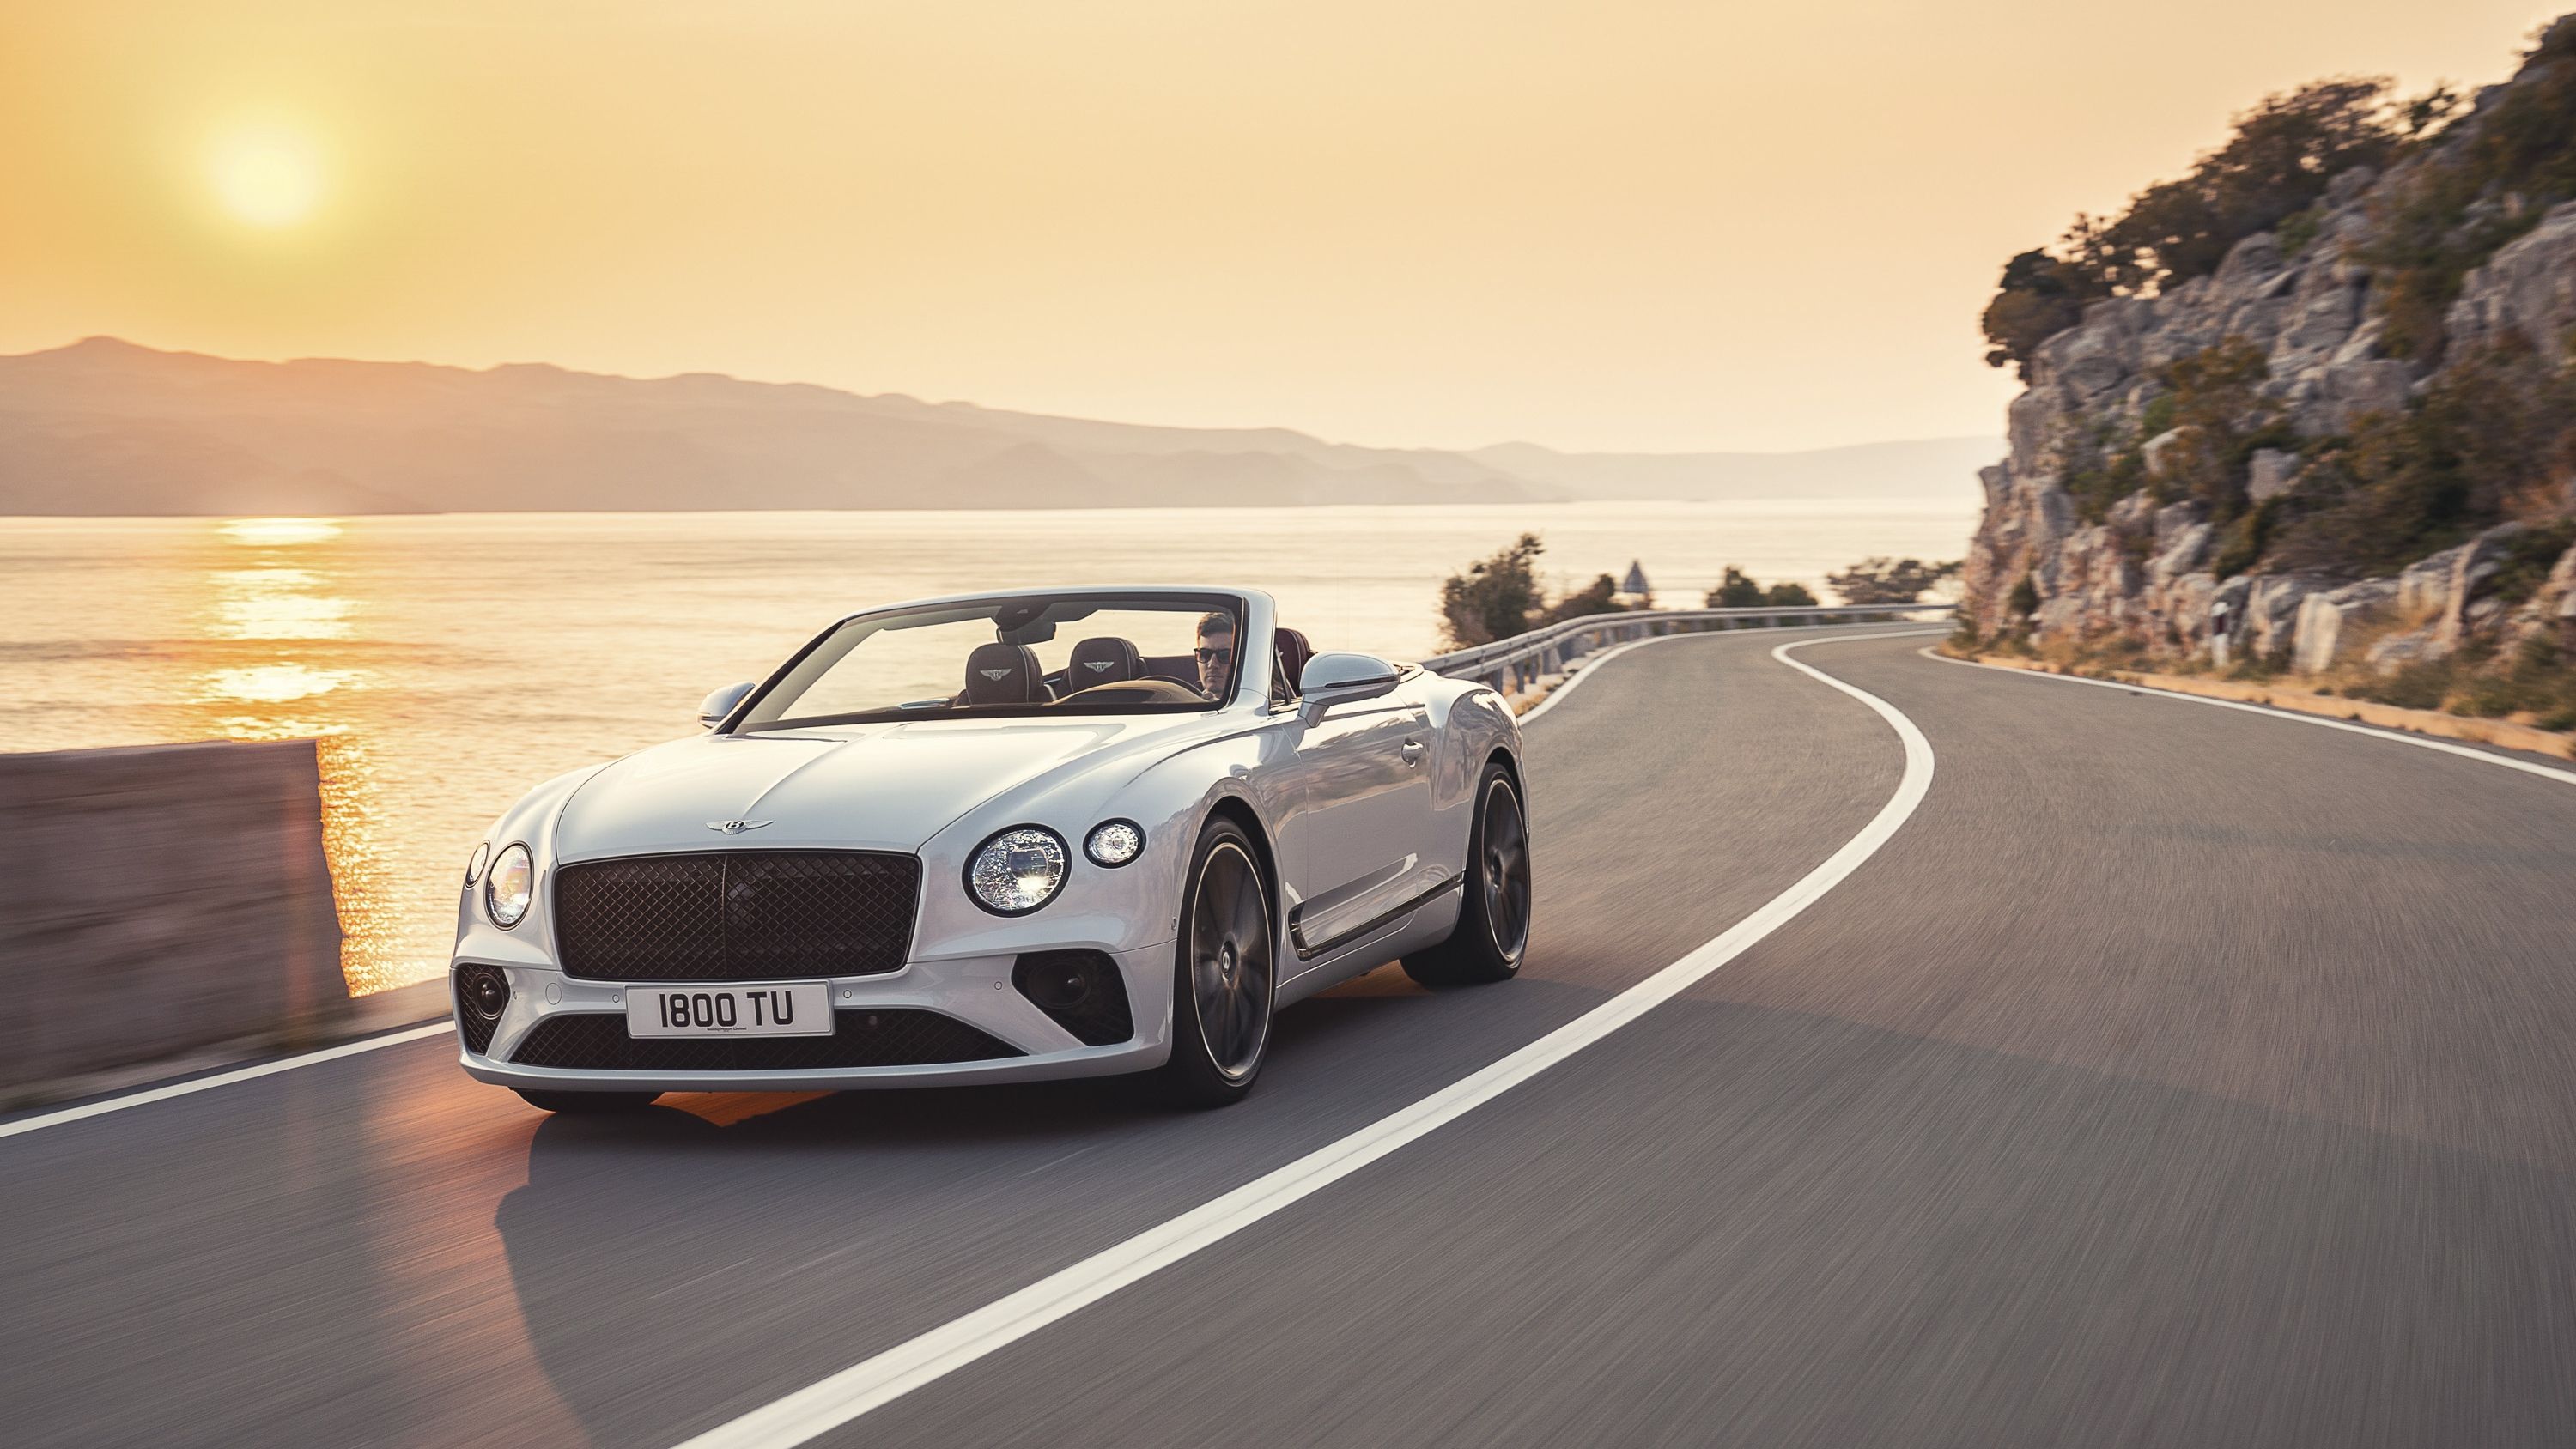 2018 - 2019 Believe it or Not, Bentley is Struggling to Compete with Tesla and Porsche